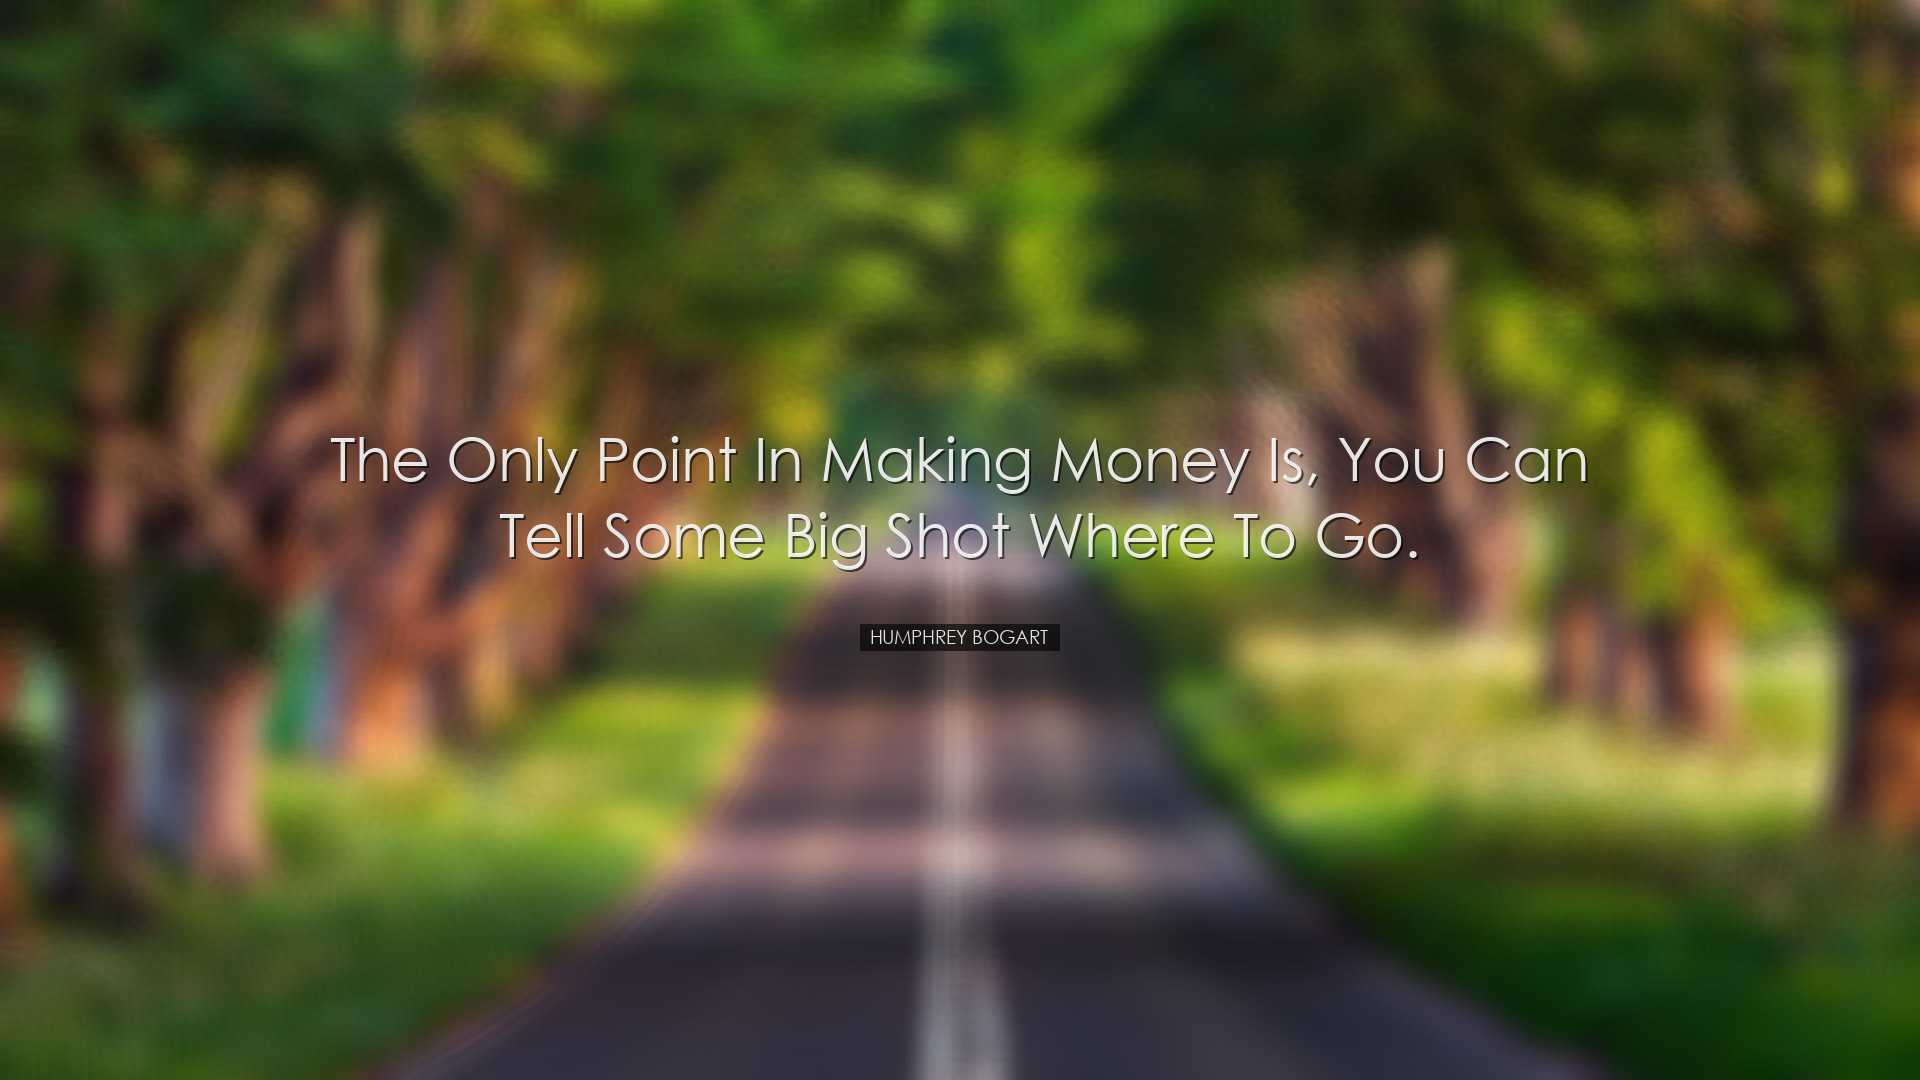 The only point in making money is, you can tell some big shot wher